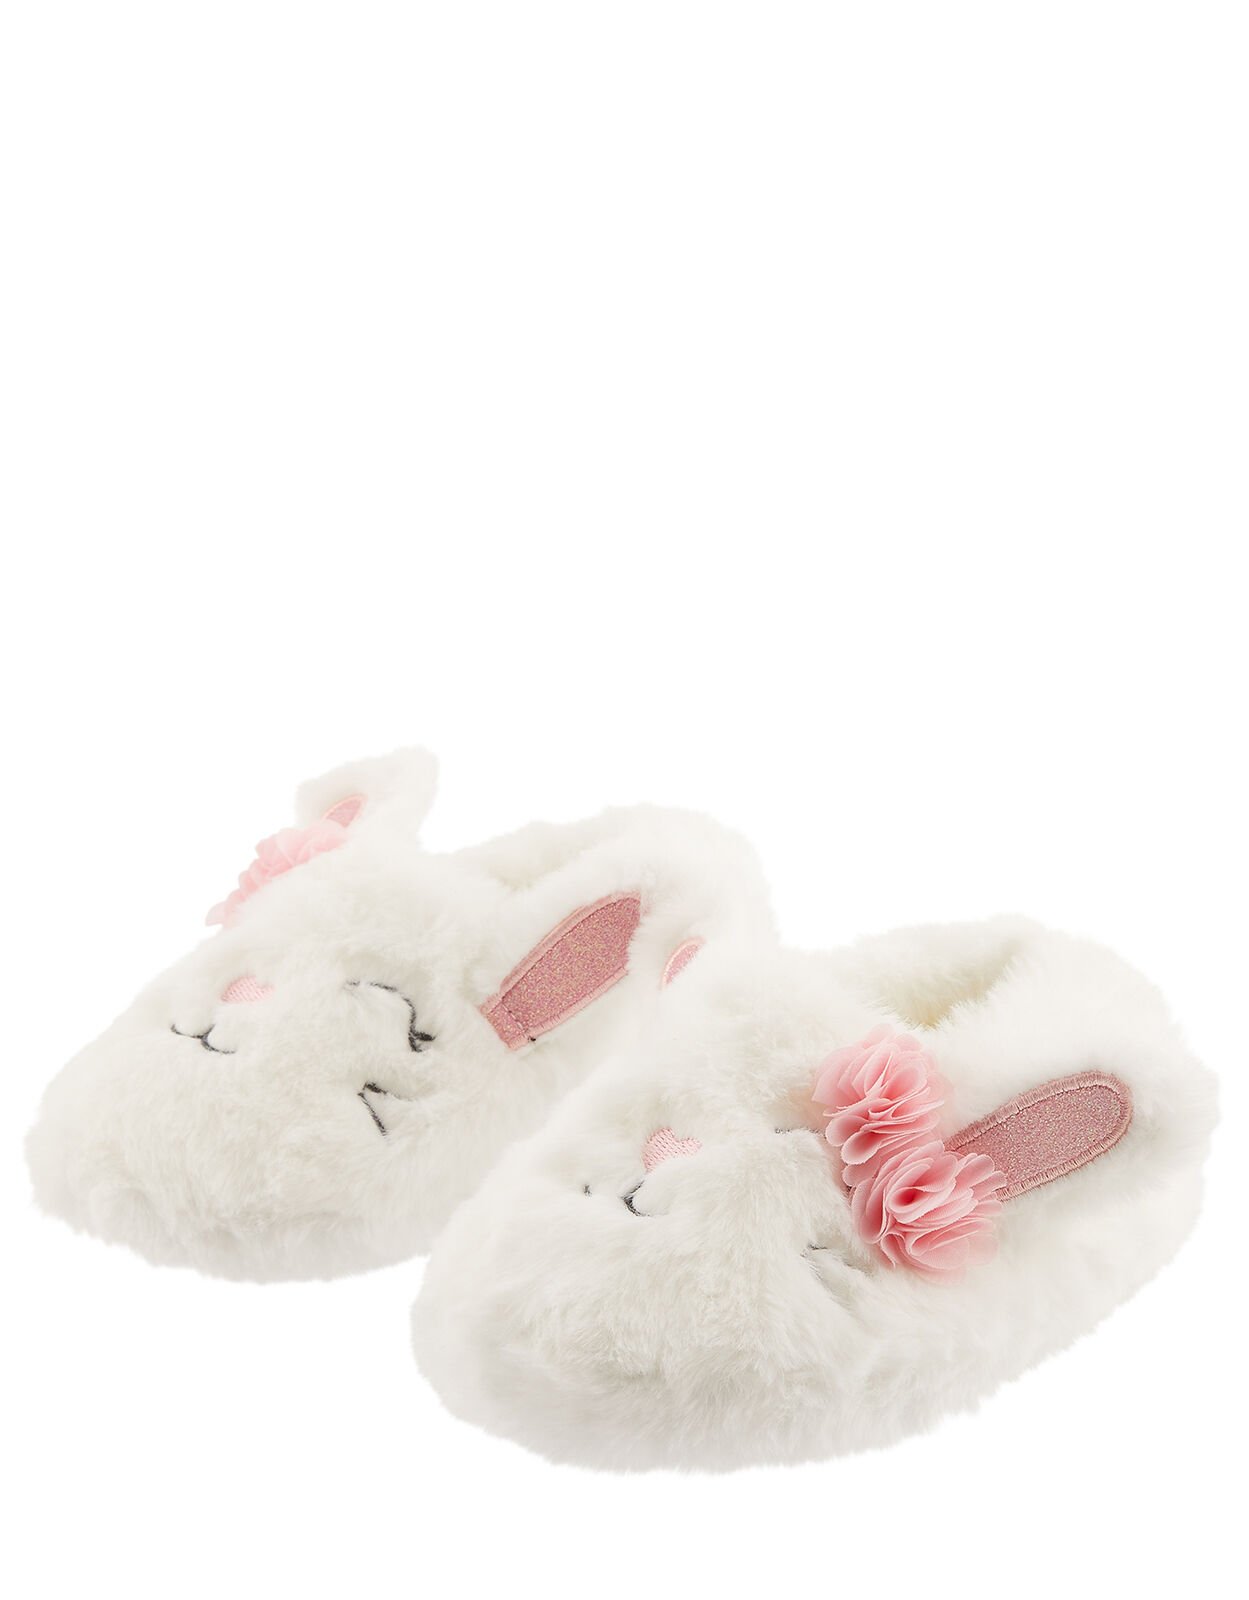 ivory slippers